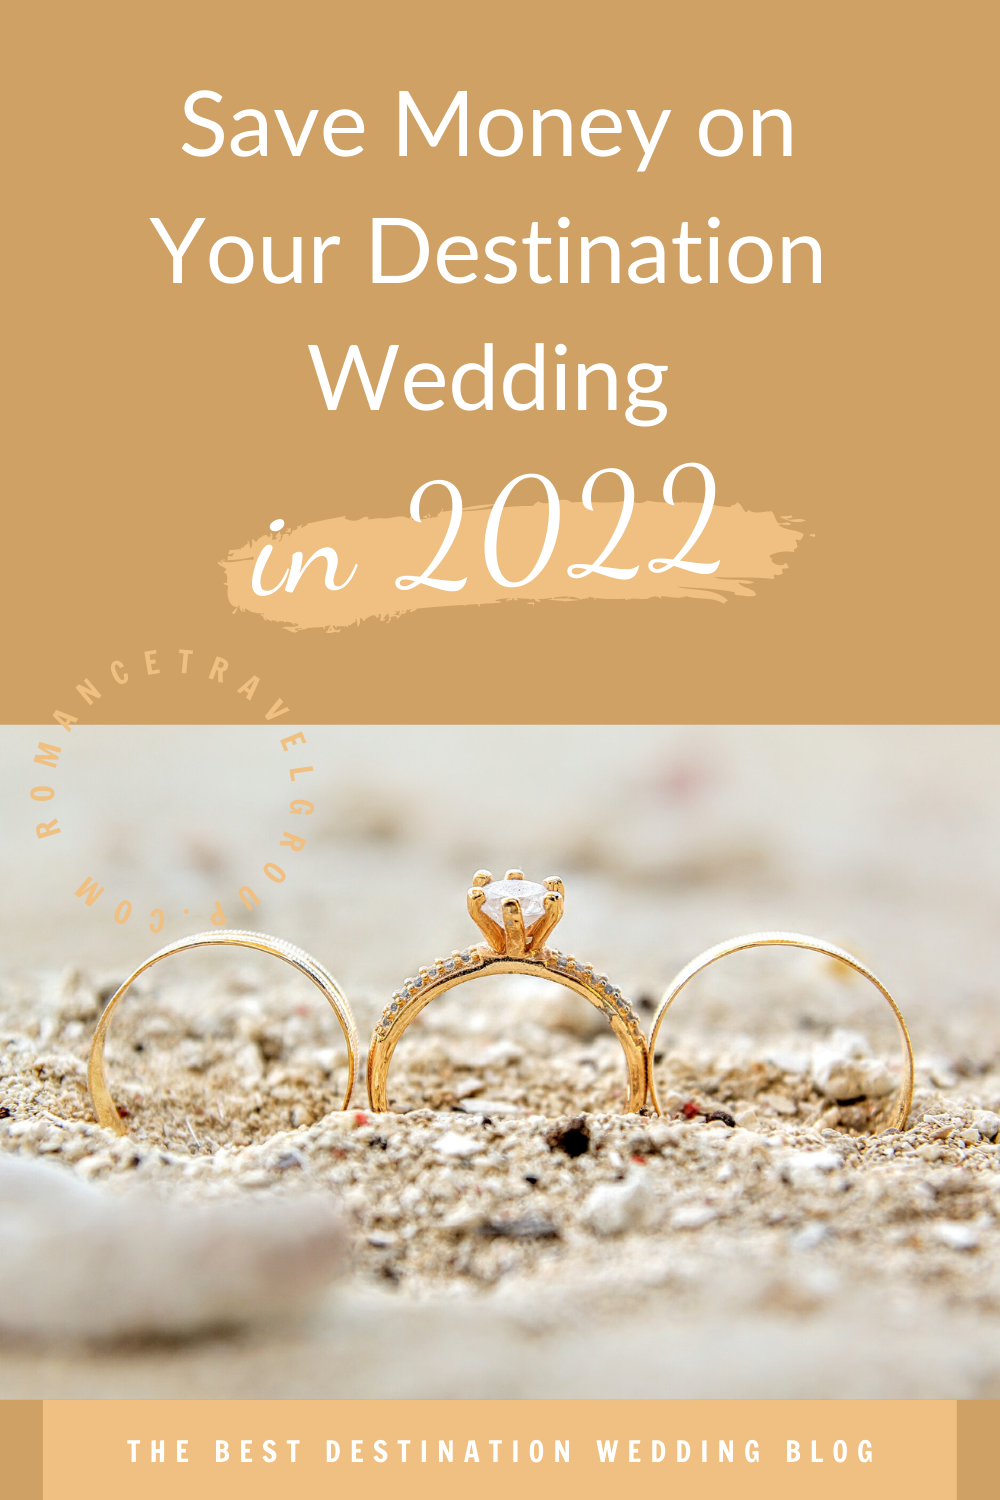 How to Save Money on Your Destination Wedding in 2022